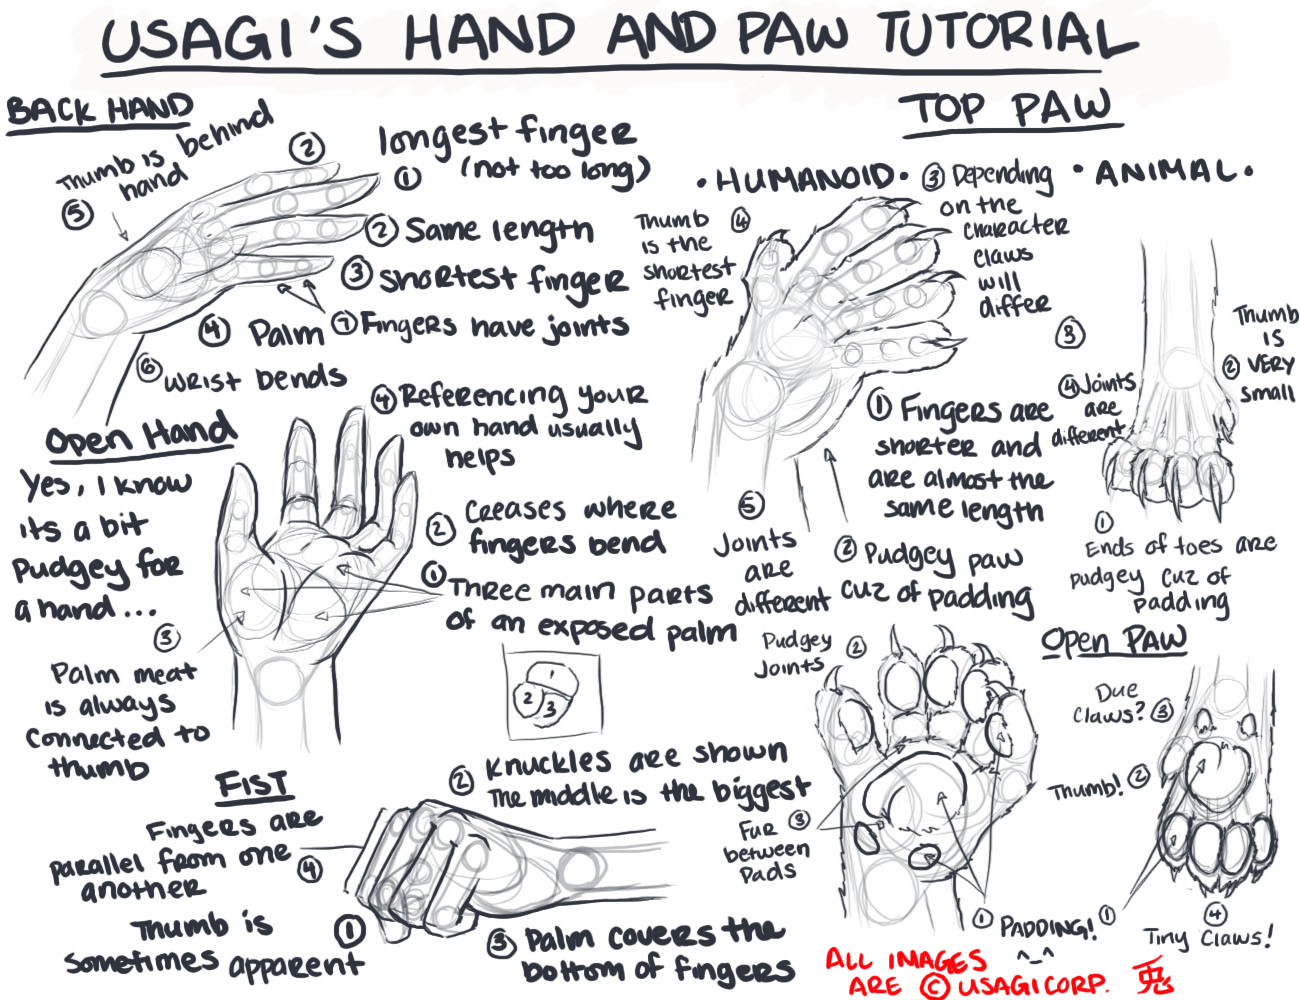 AND PAW TUTORIAL:: by UsagiSasami on